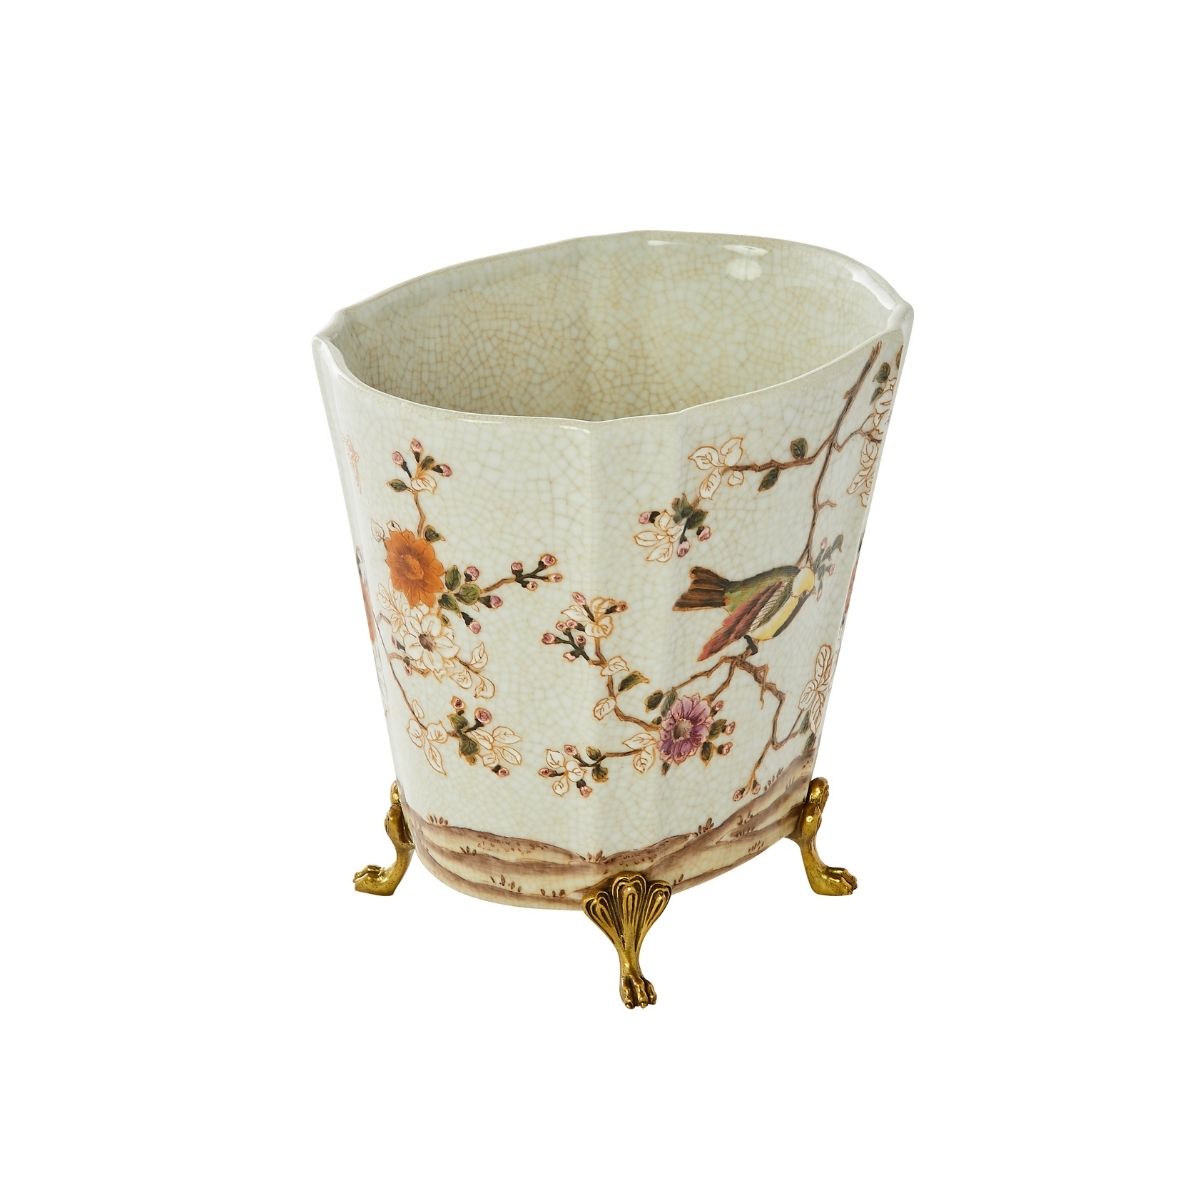 Chinoiserie Planter in Cafe